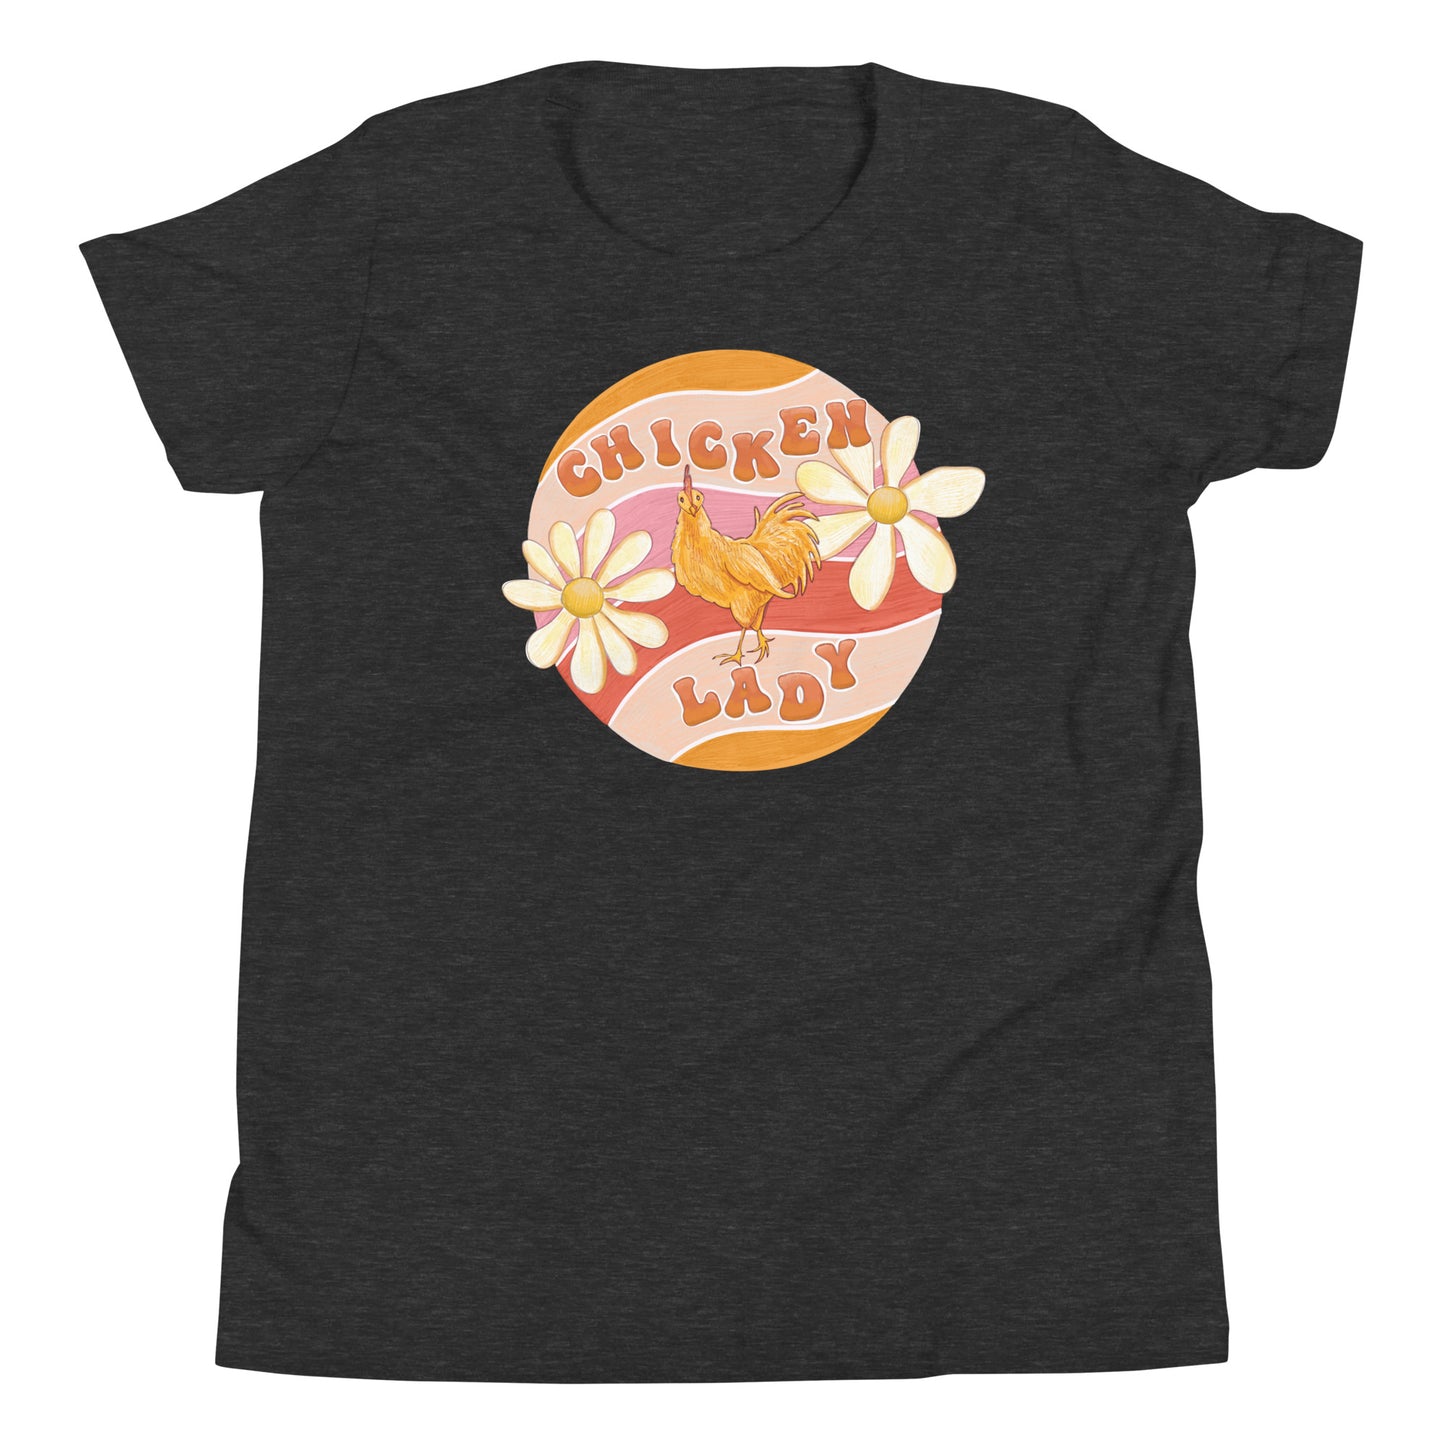 Youth Chicken Lady T-Shirt